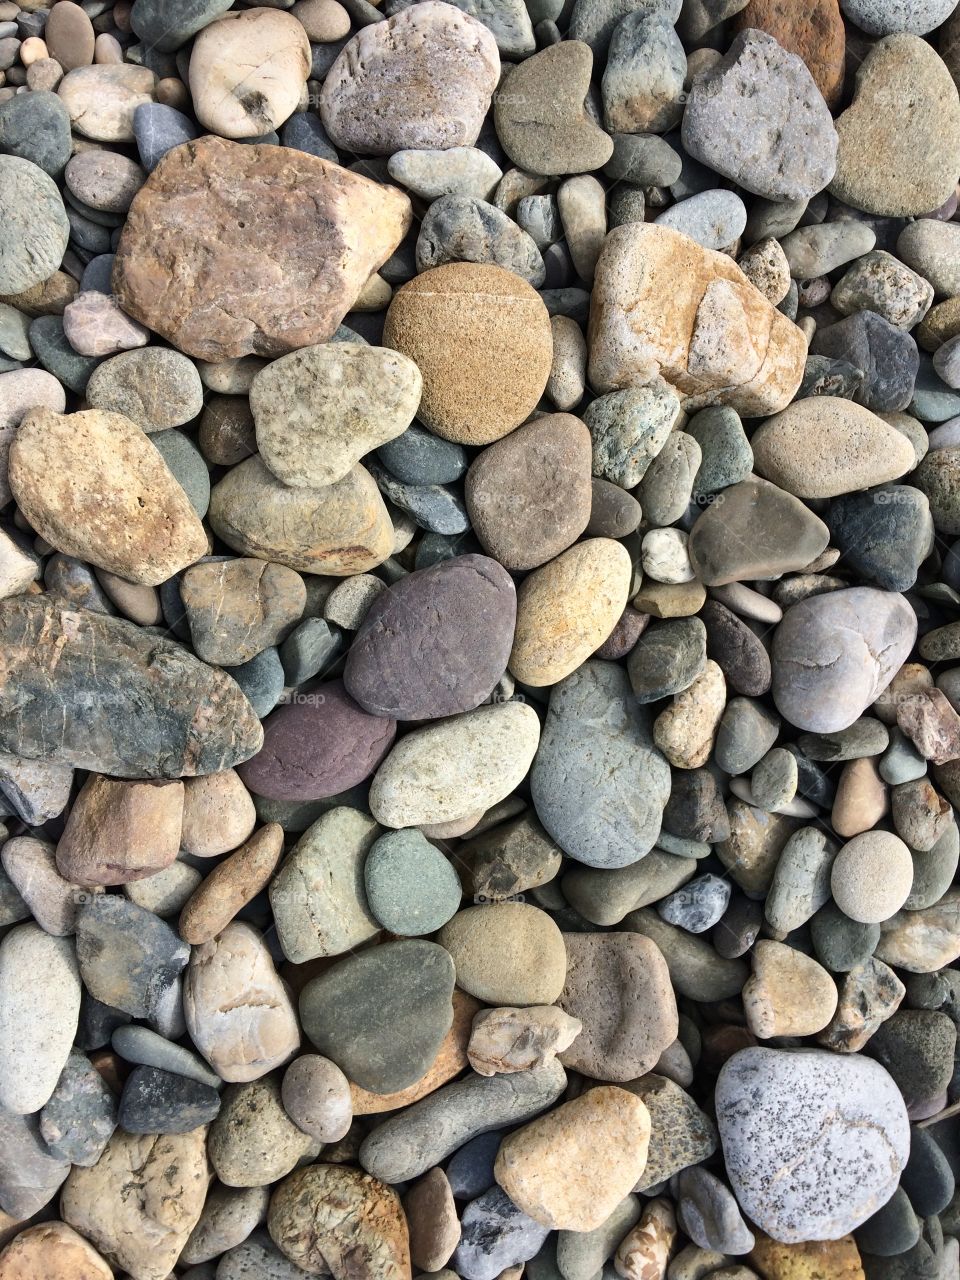 Water-rolled beach stones and pebbles